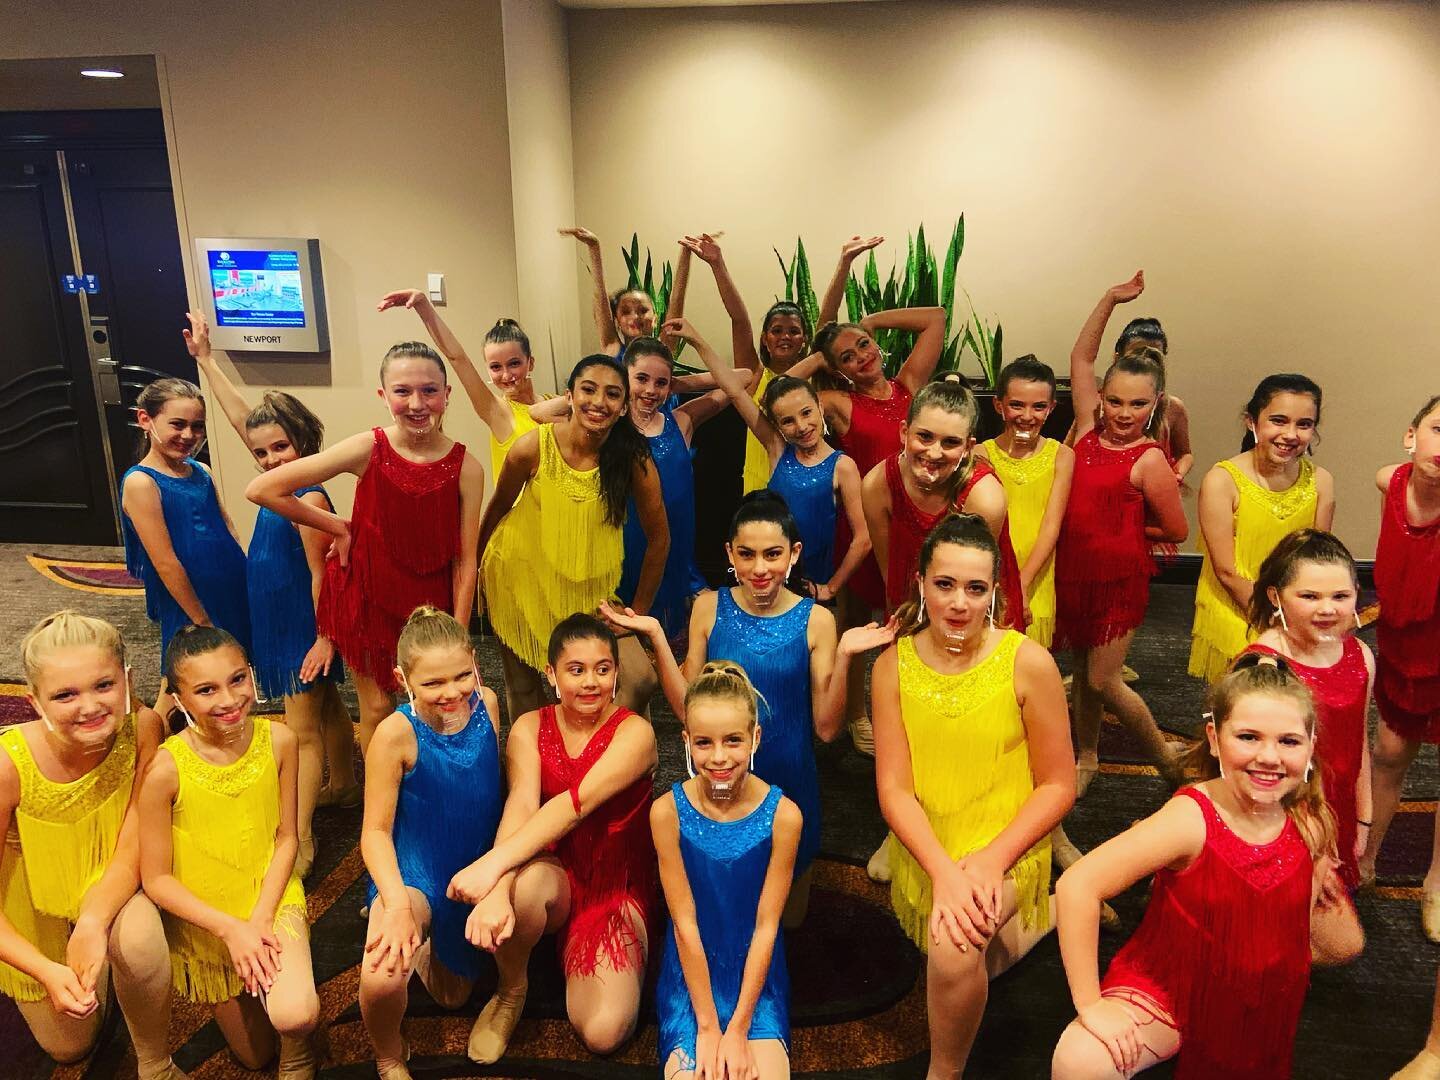 Throwing it back to competition weekend with these beauties!  Our &ldquo;Forget About The Boy&rdquo; dancers killed it at their first competition with @spotlightdancecup 💃🏻👊🏽 #tbt #spotlightdancecup #competitiondancers #fifthrowcompany #fifthrowc